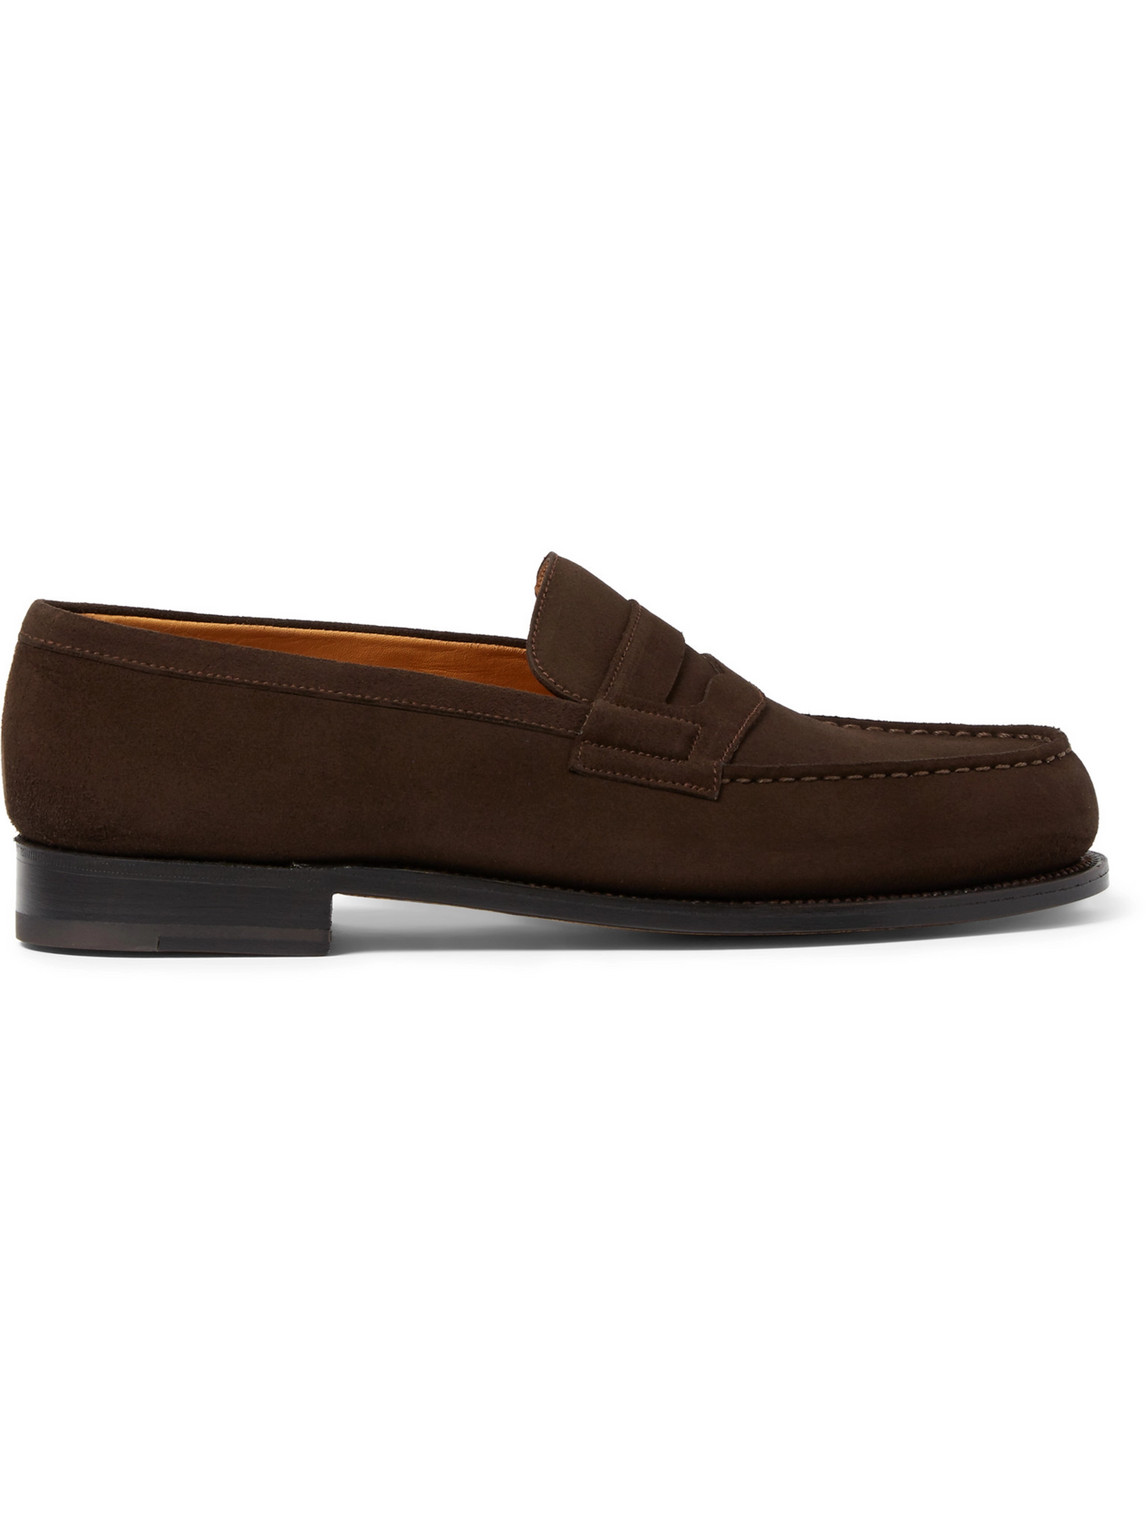 Jm Weston 180 Moccasin Suede Loafers In Brown